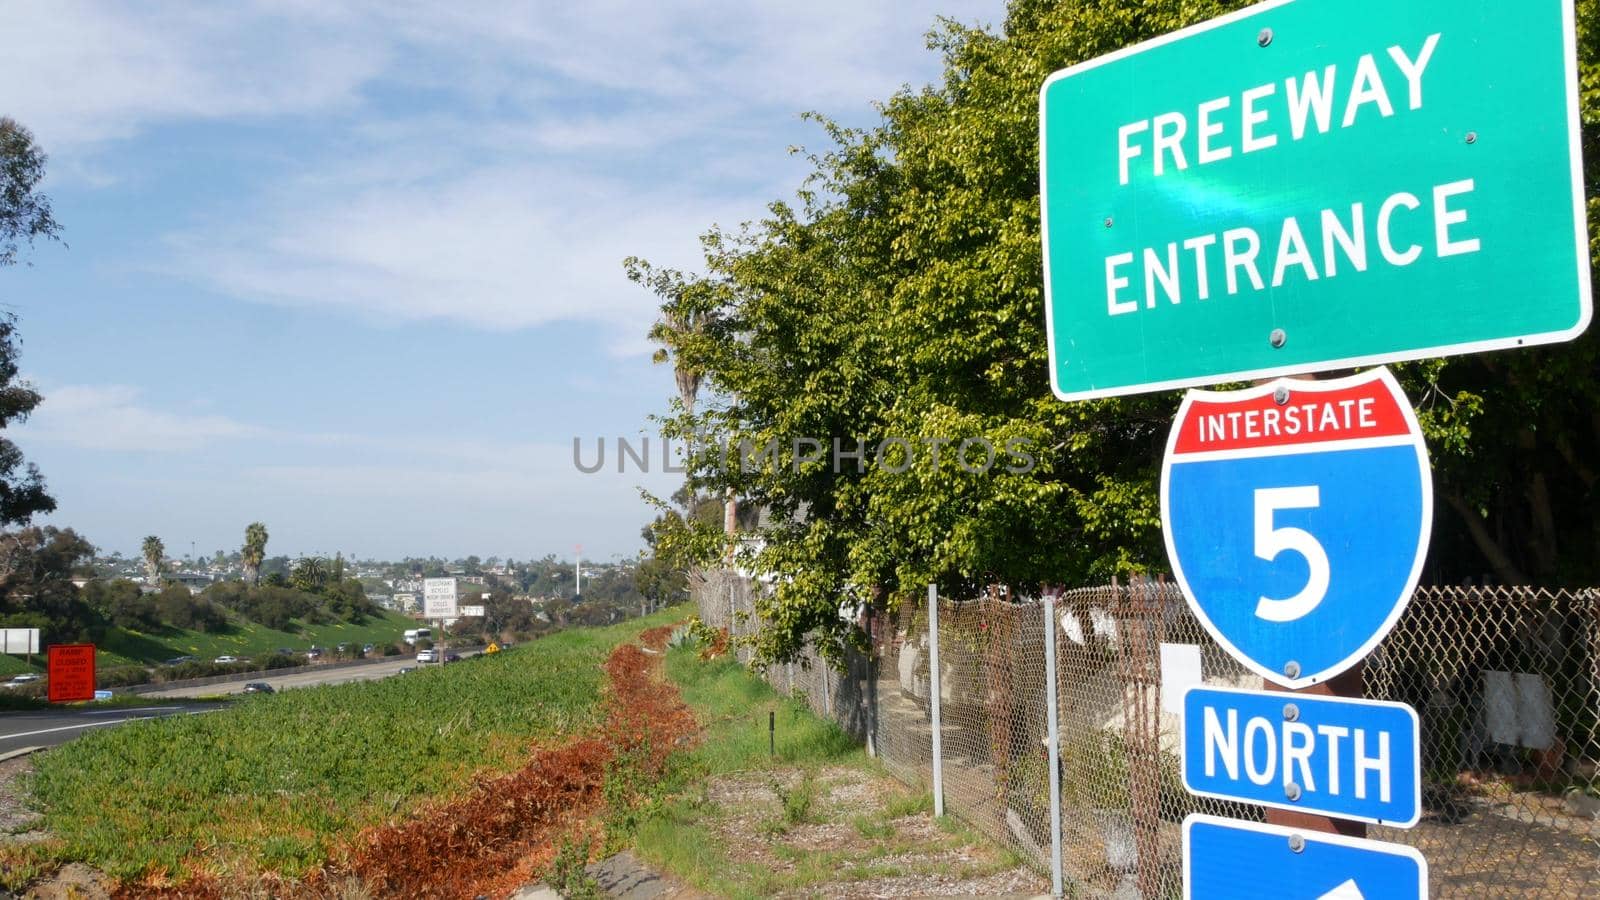 Freeway entrance, information sign on crossraod in USA. Route to Los Angeles, California. Interstate highway 5 signpost as symbol of road trip, transportation and traffic safety rules and regulations by DogoraSun